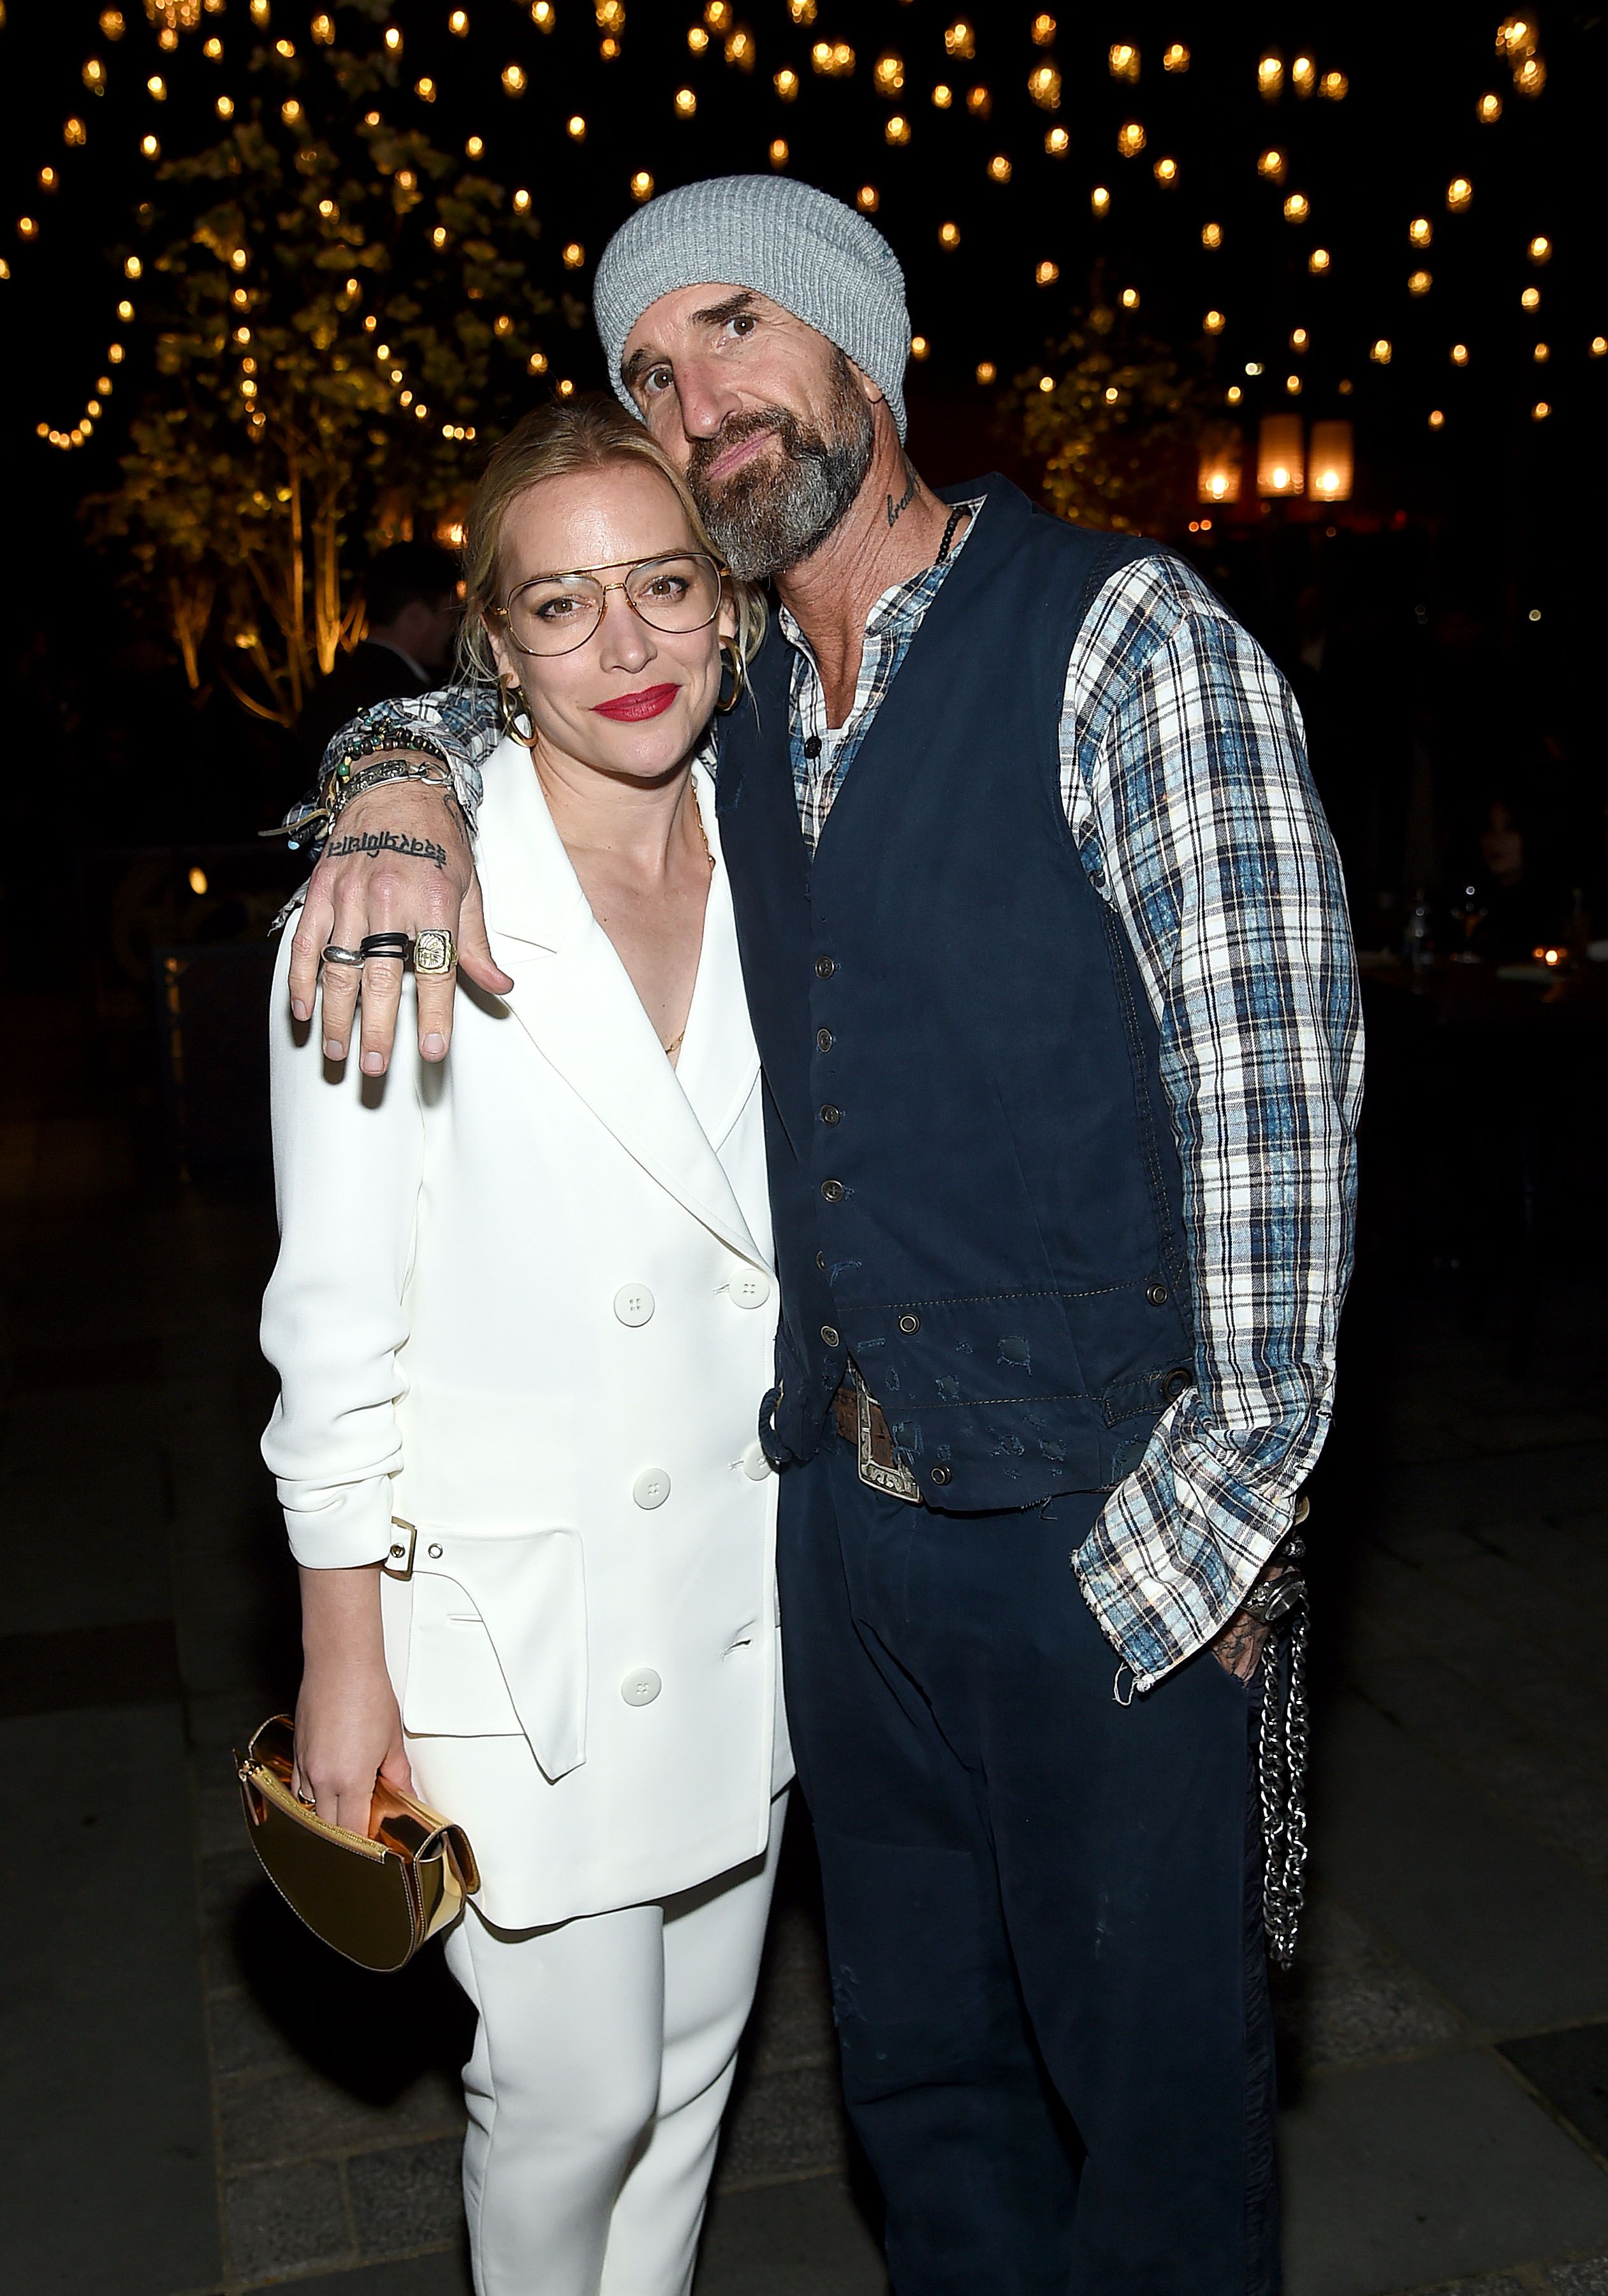 Piper Perabo and Stephen Kay during the Opening Night Party of the 2019 Tribeca Film Festival at Tavern On The Green on April 24, 2019, in New York City. | Source: Getty Images